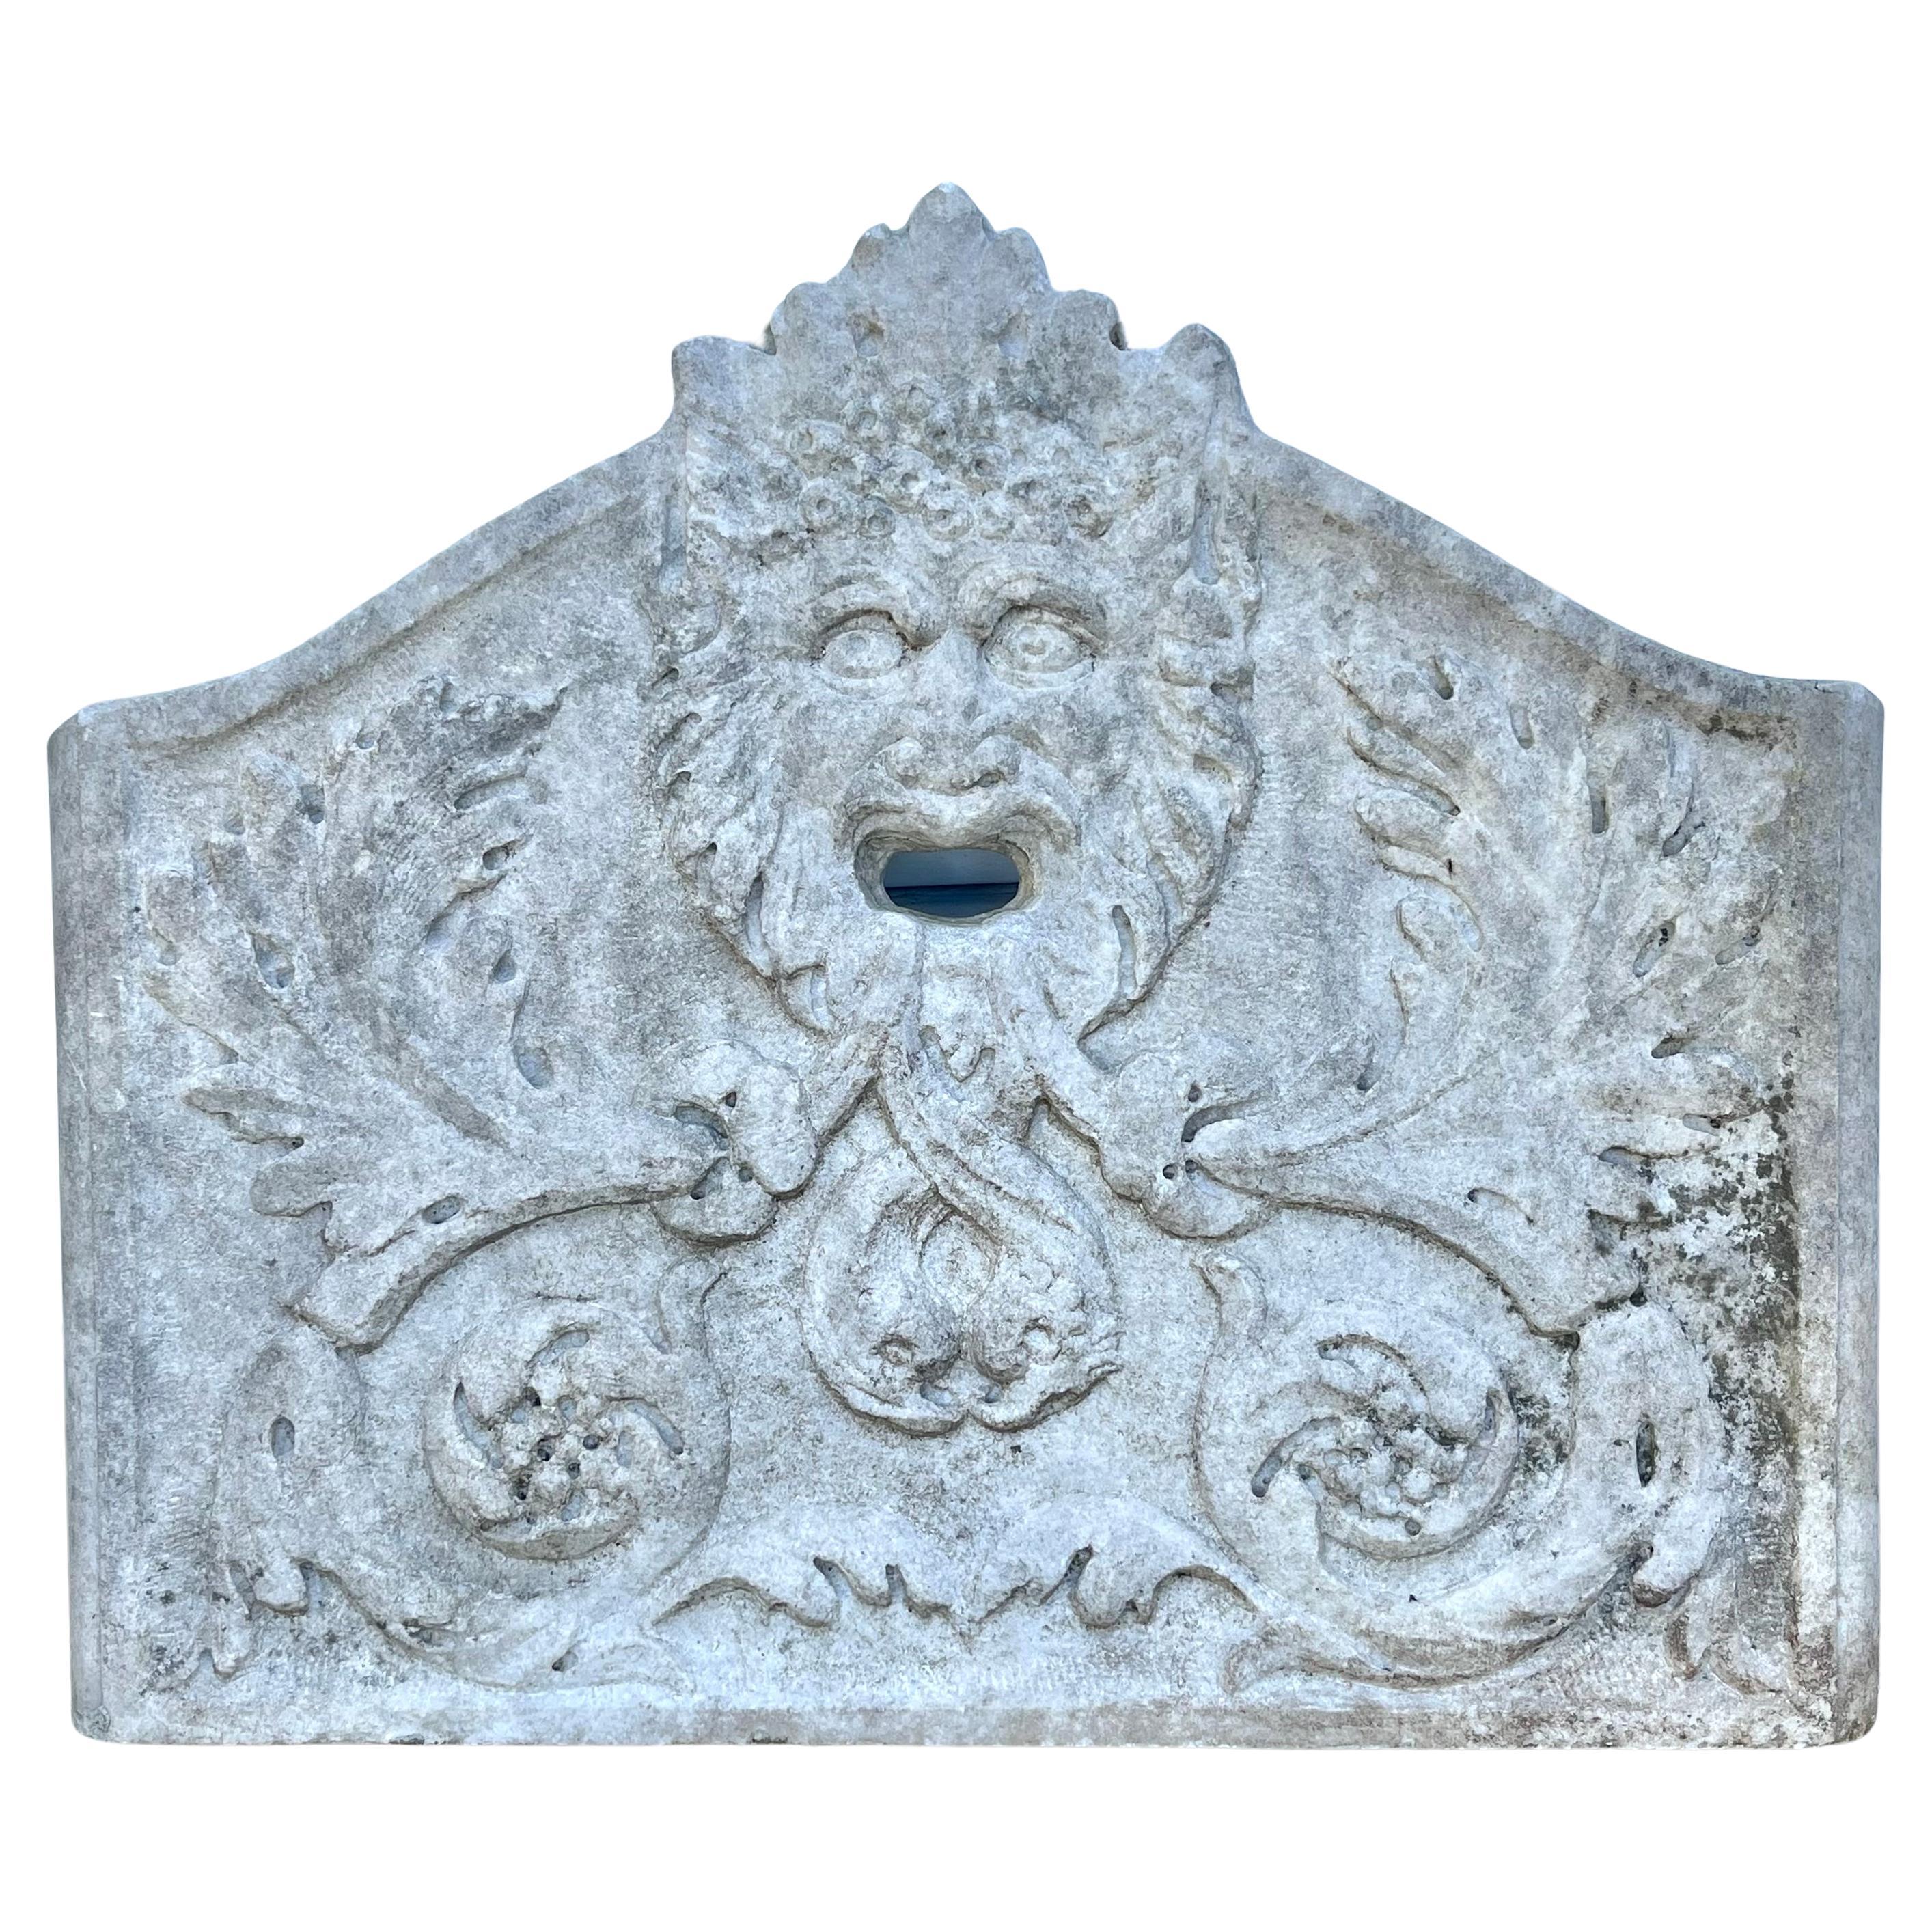 Marble Fountain Plaque from Astor's Ferncliff